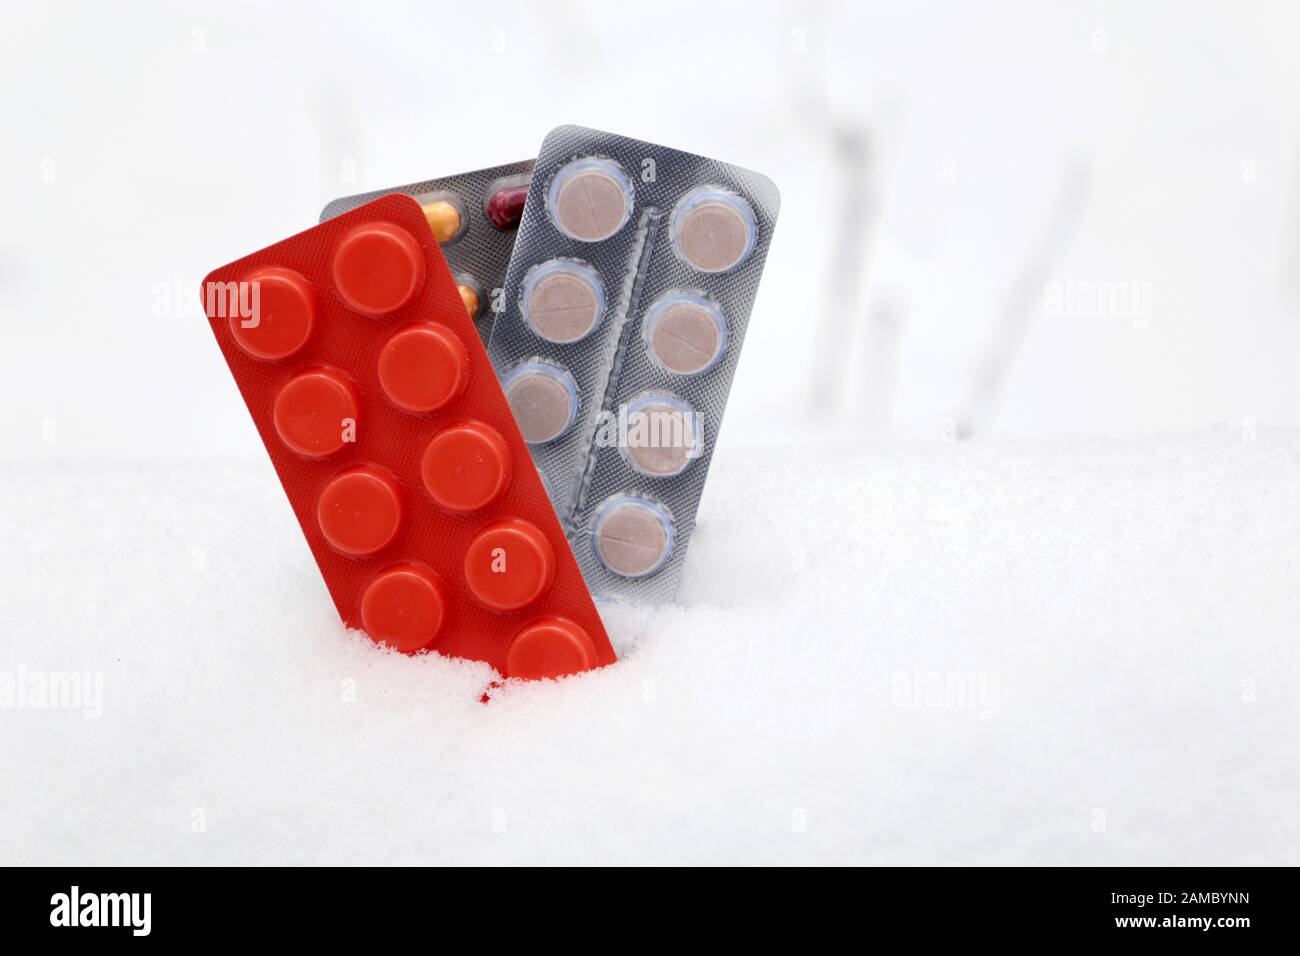 Pills in blister packs in the snow, different cooled medication close-up. Concept of pharmacy, vitamins in cold and flu season, health care in winter Stock Photo